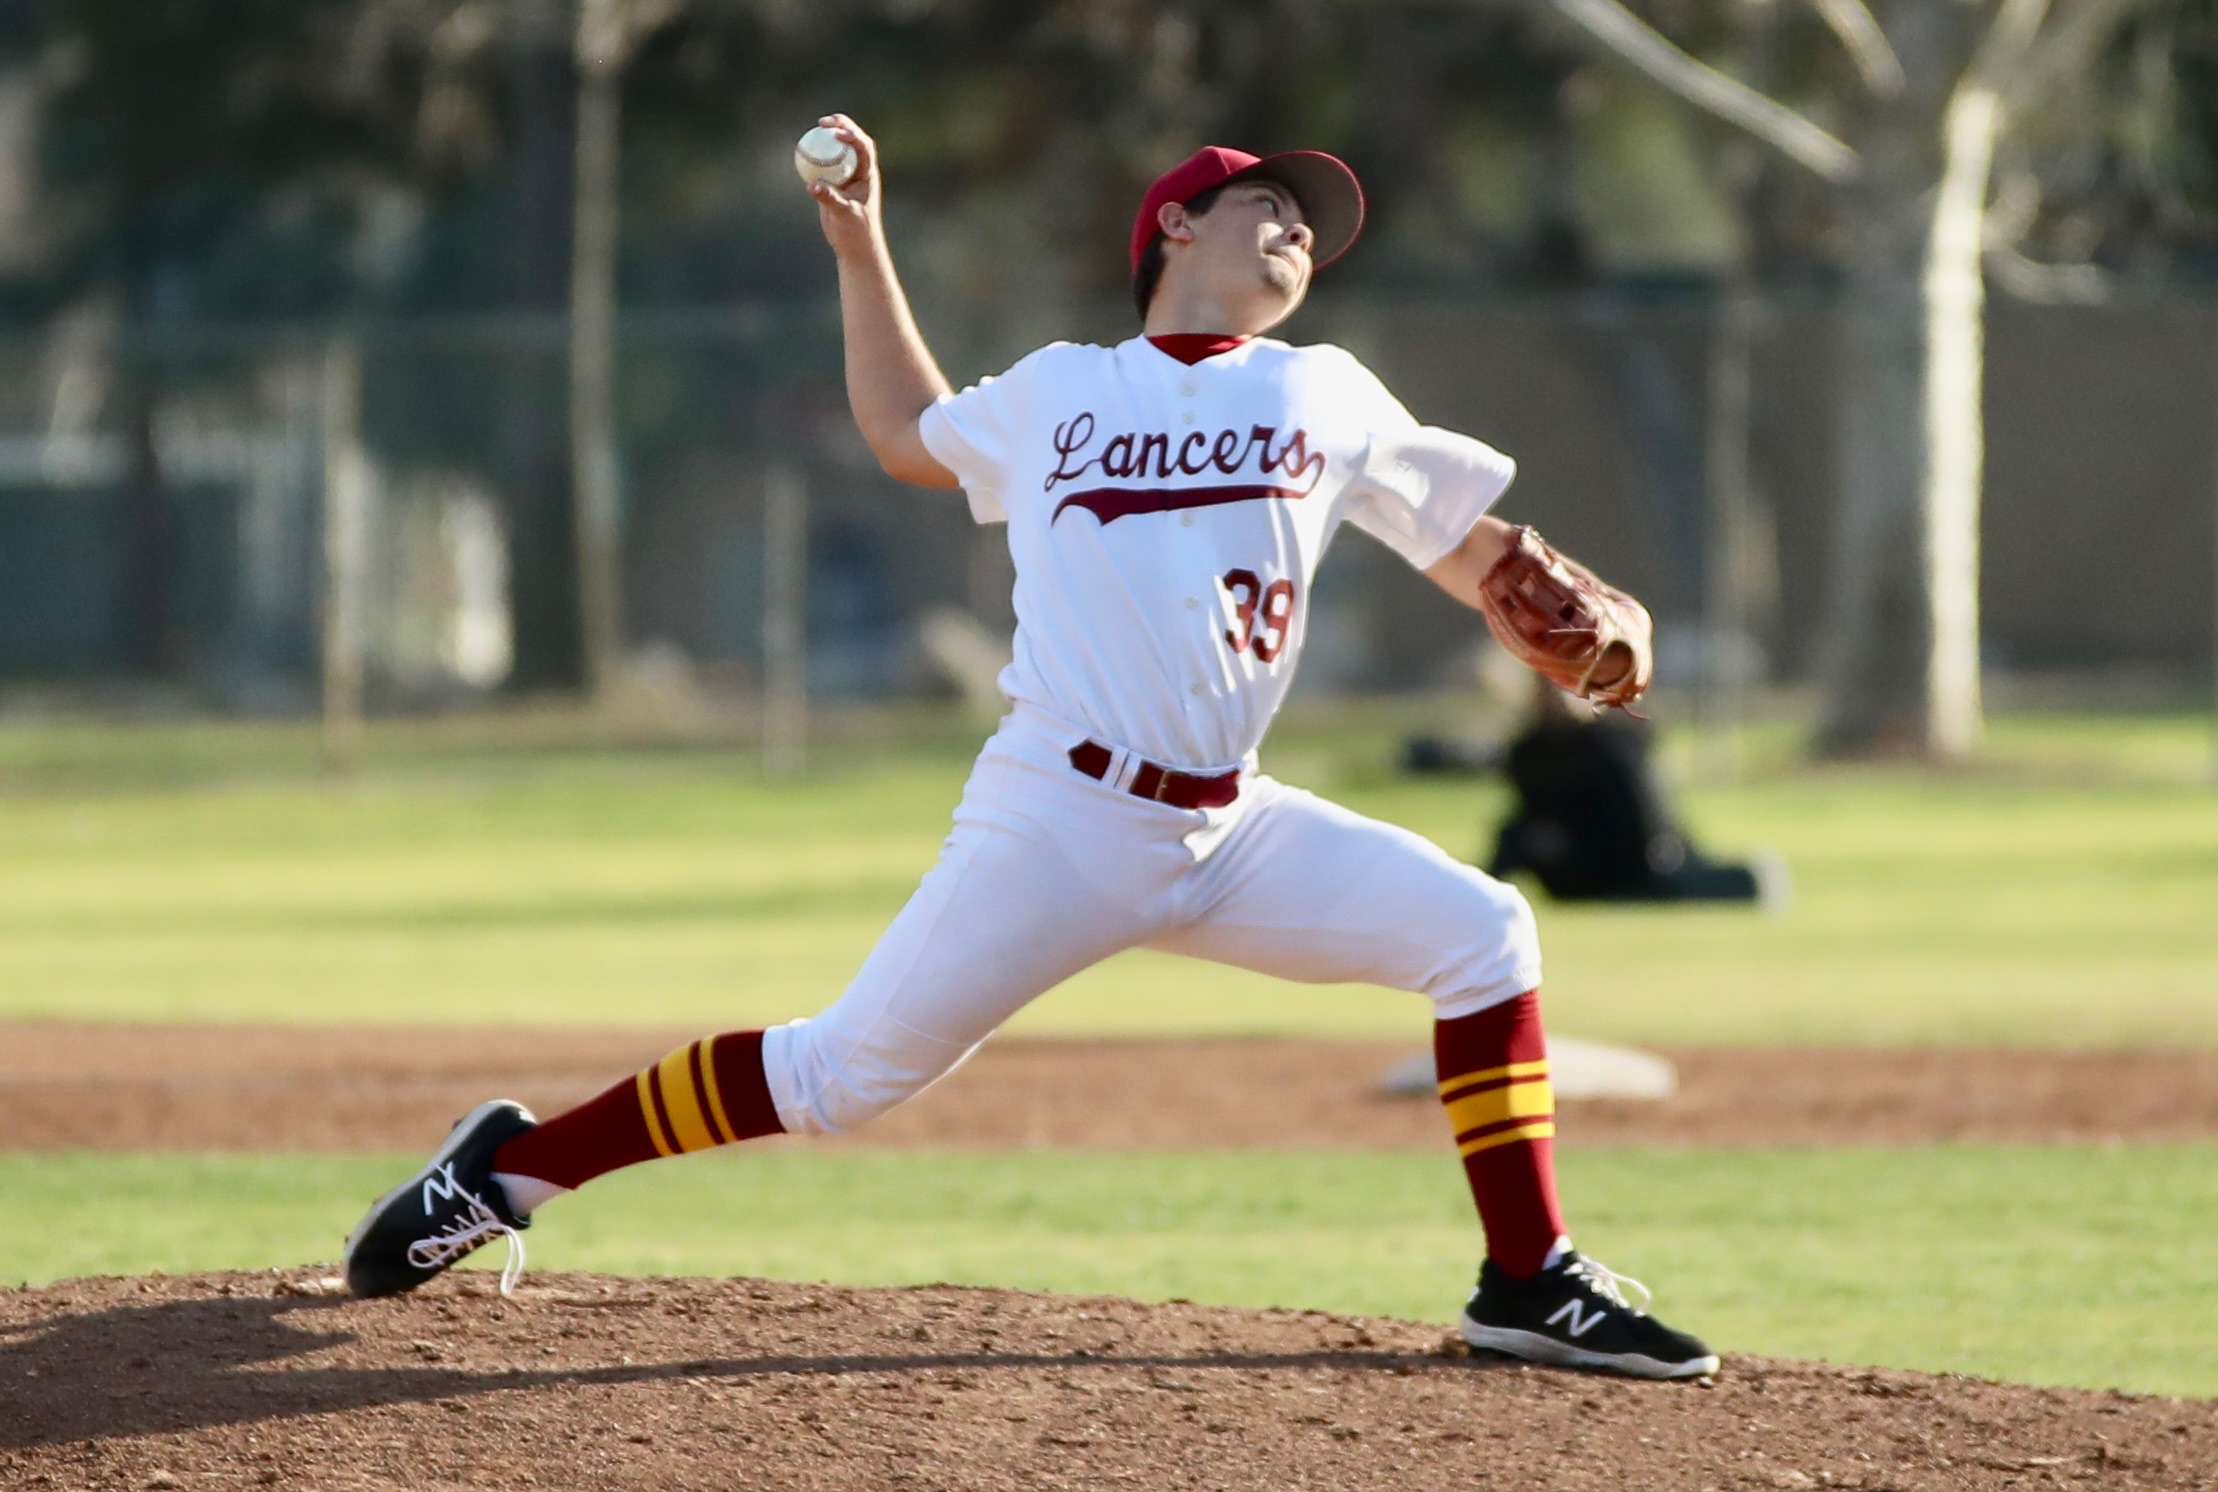 Rider Gardner fires a pitch in Thursday's win at Brookside Park (photo by Michael Watkins, Athletics).